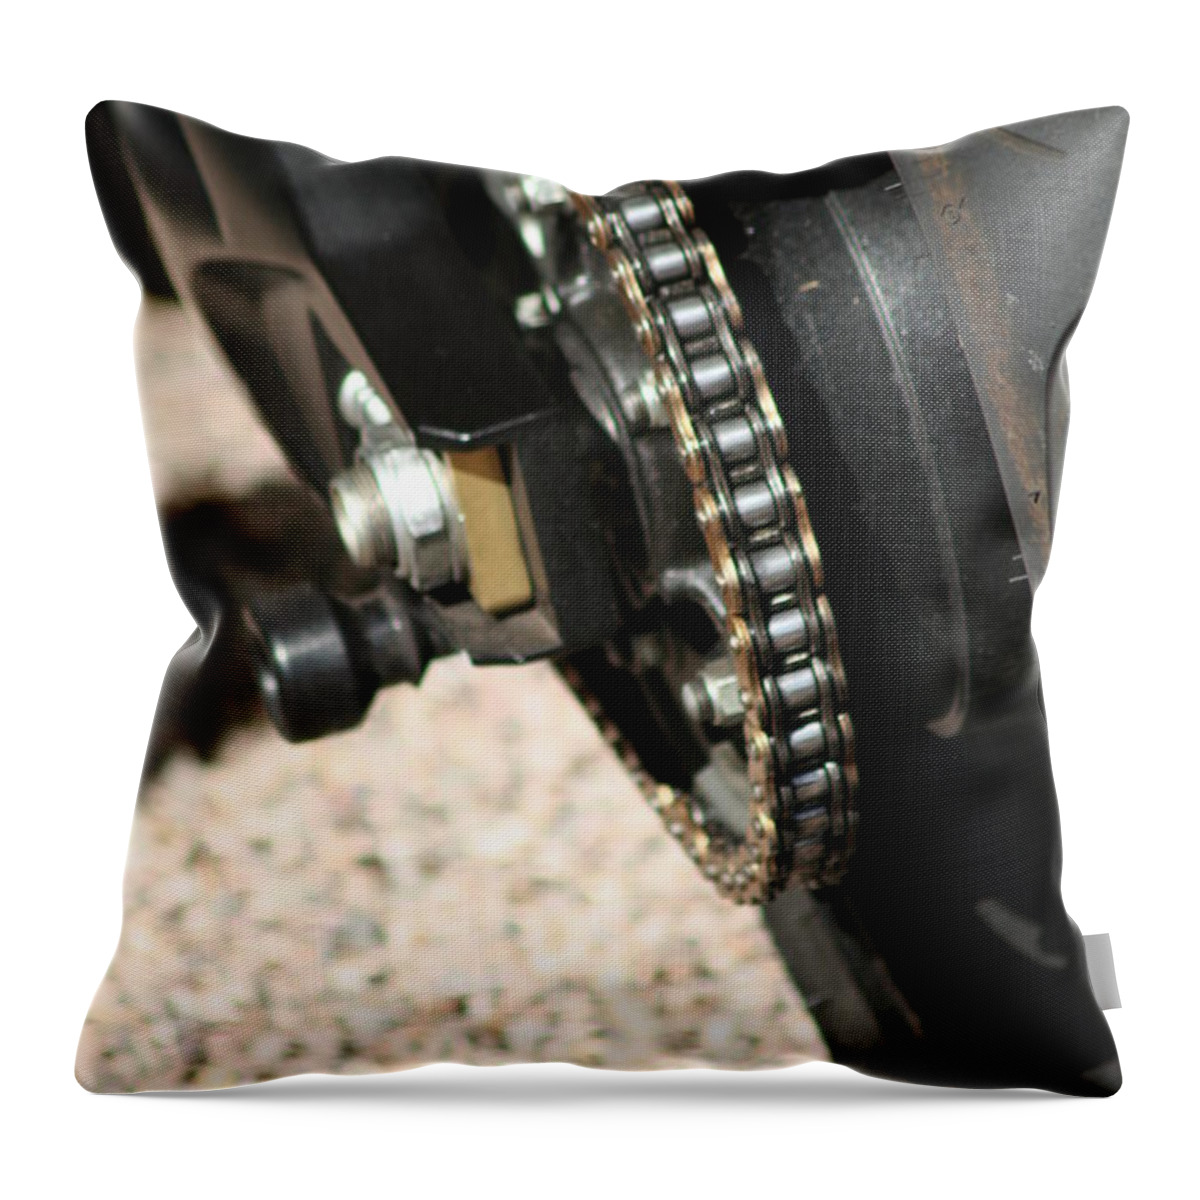 Motorcycle Throw Pillow featuring the photograph Sprocket by David S Reynolds